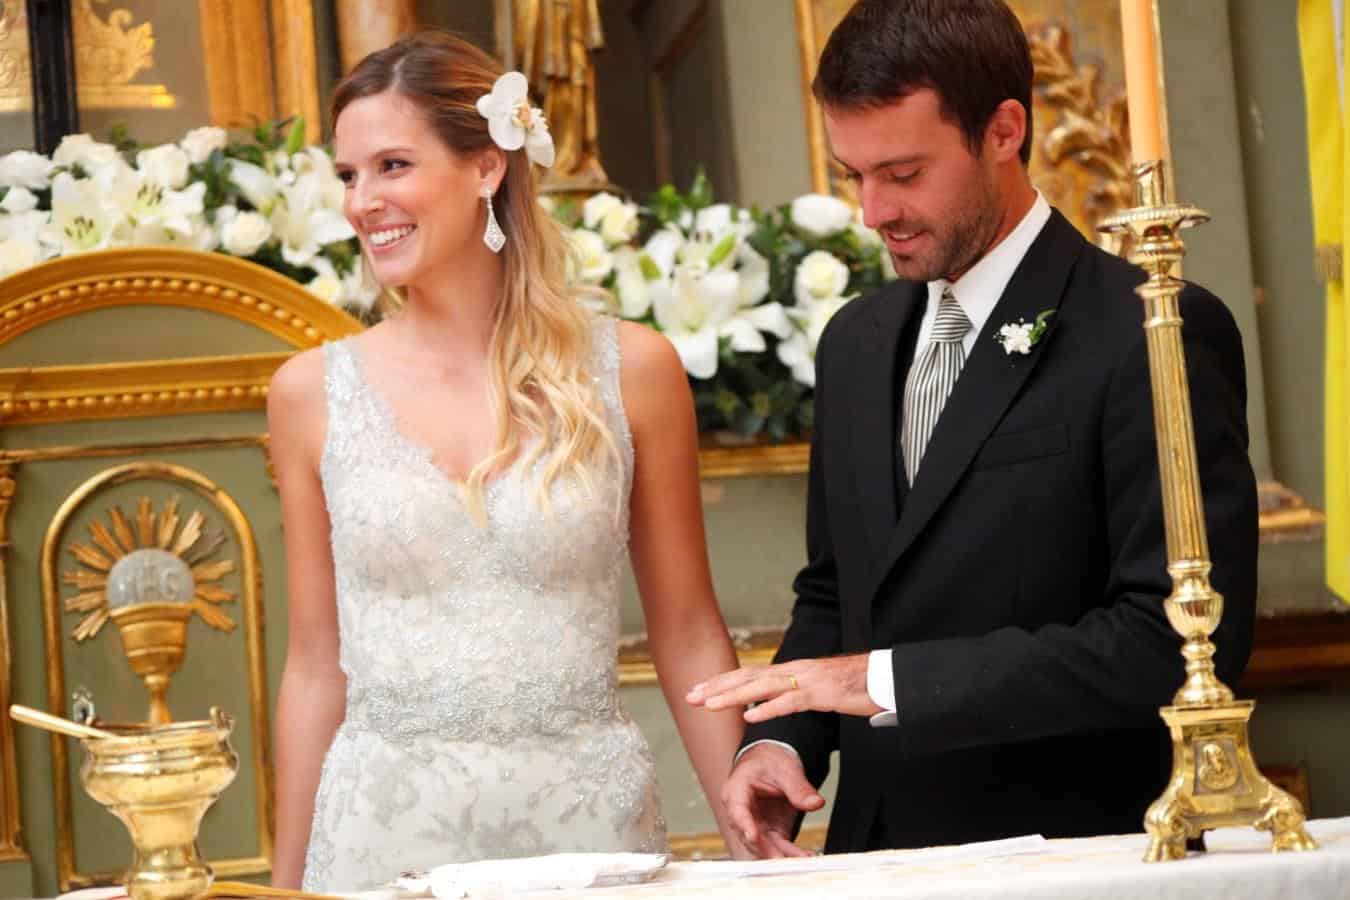 Facundo Pieres and Agustina Wernicke walked down the altar together united by Piaget